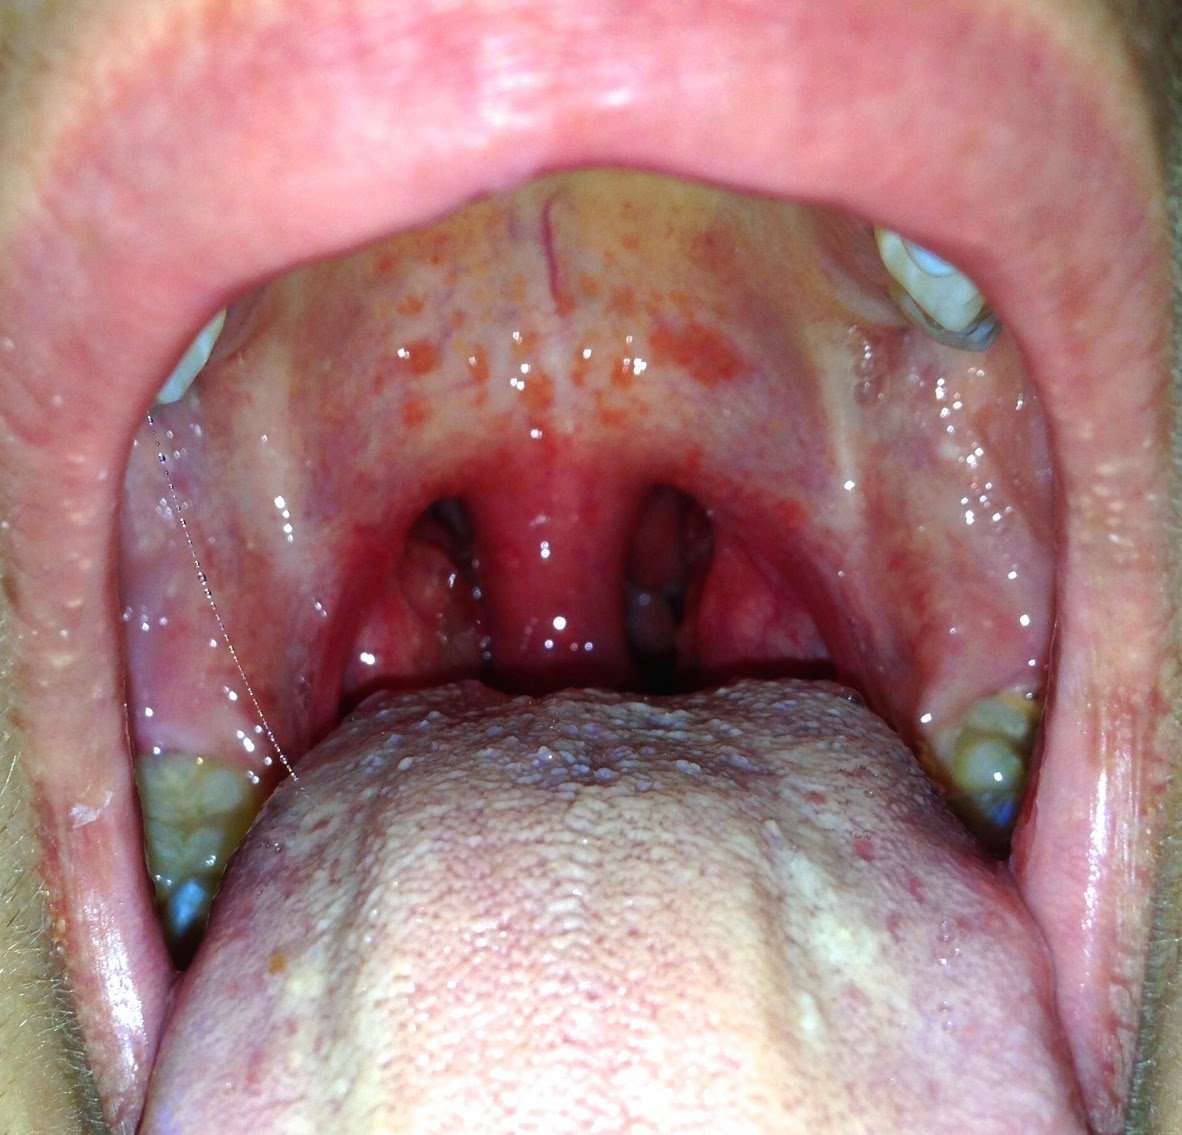 Is This Strep Throat?  Dr. Jill Grimes